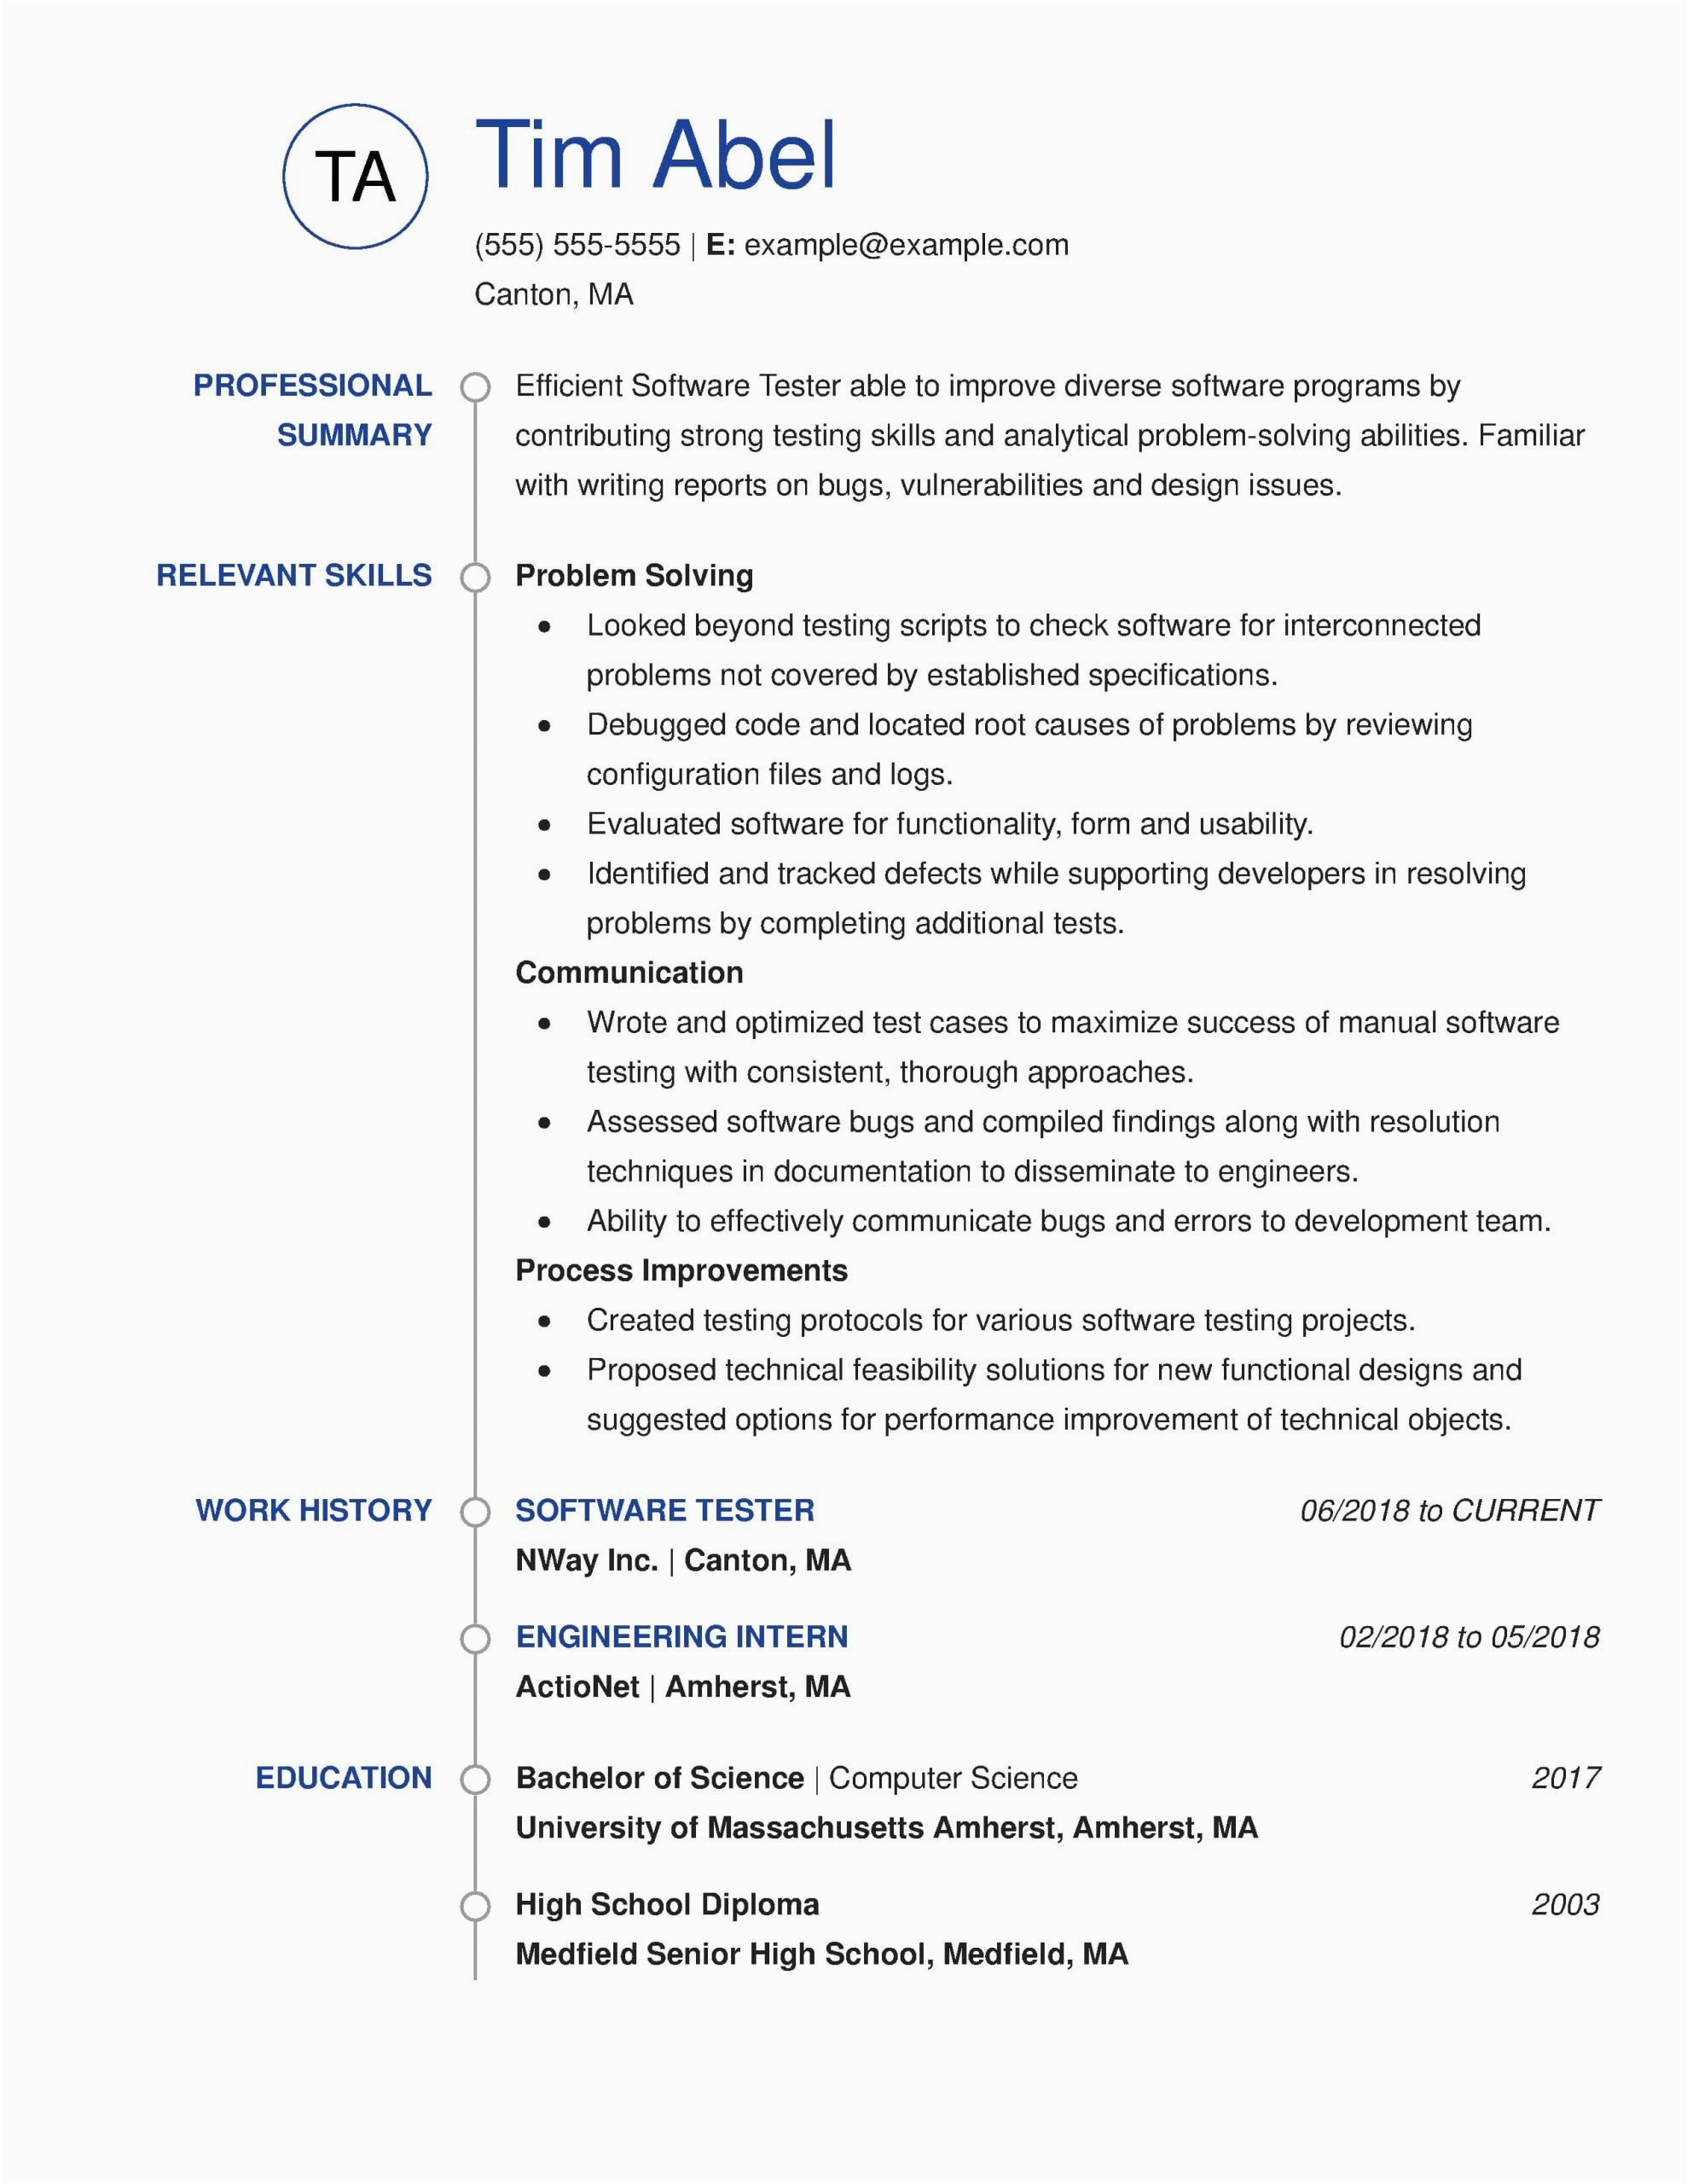 Headline or Summary for Resume Samples Resume Headline Examples for Accounting Resmud